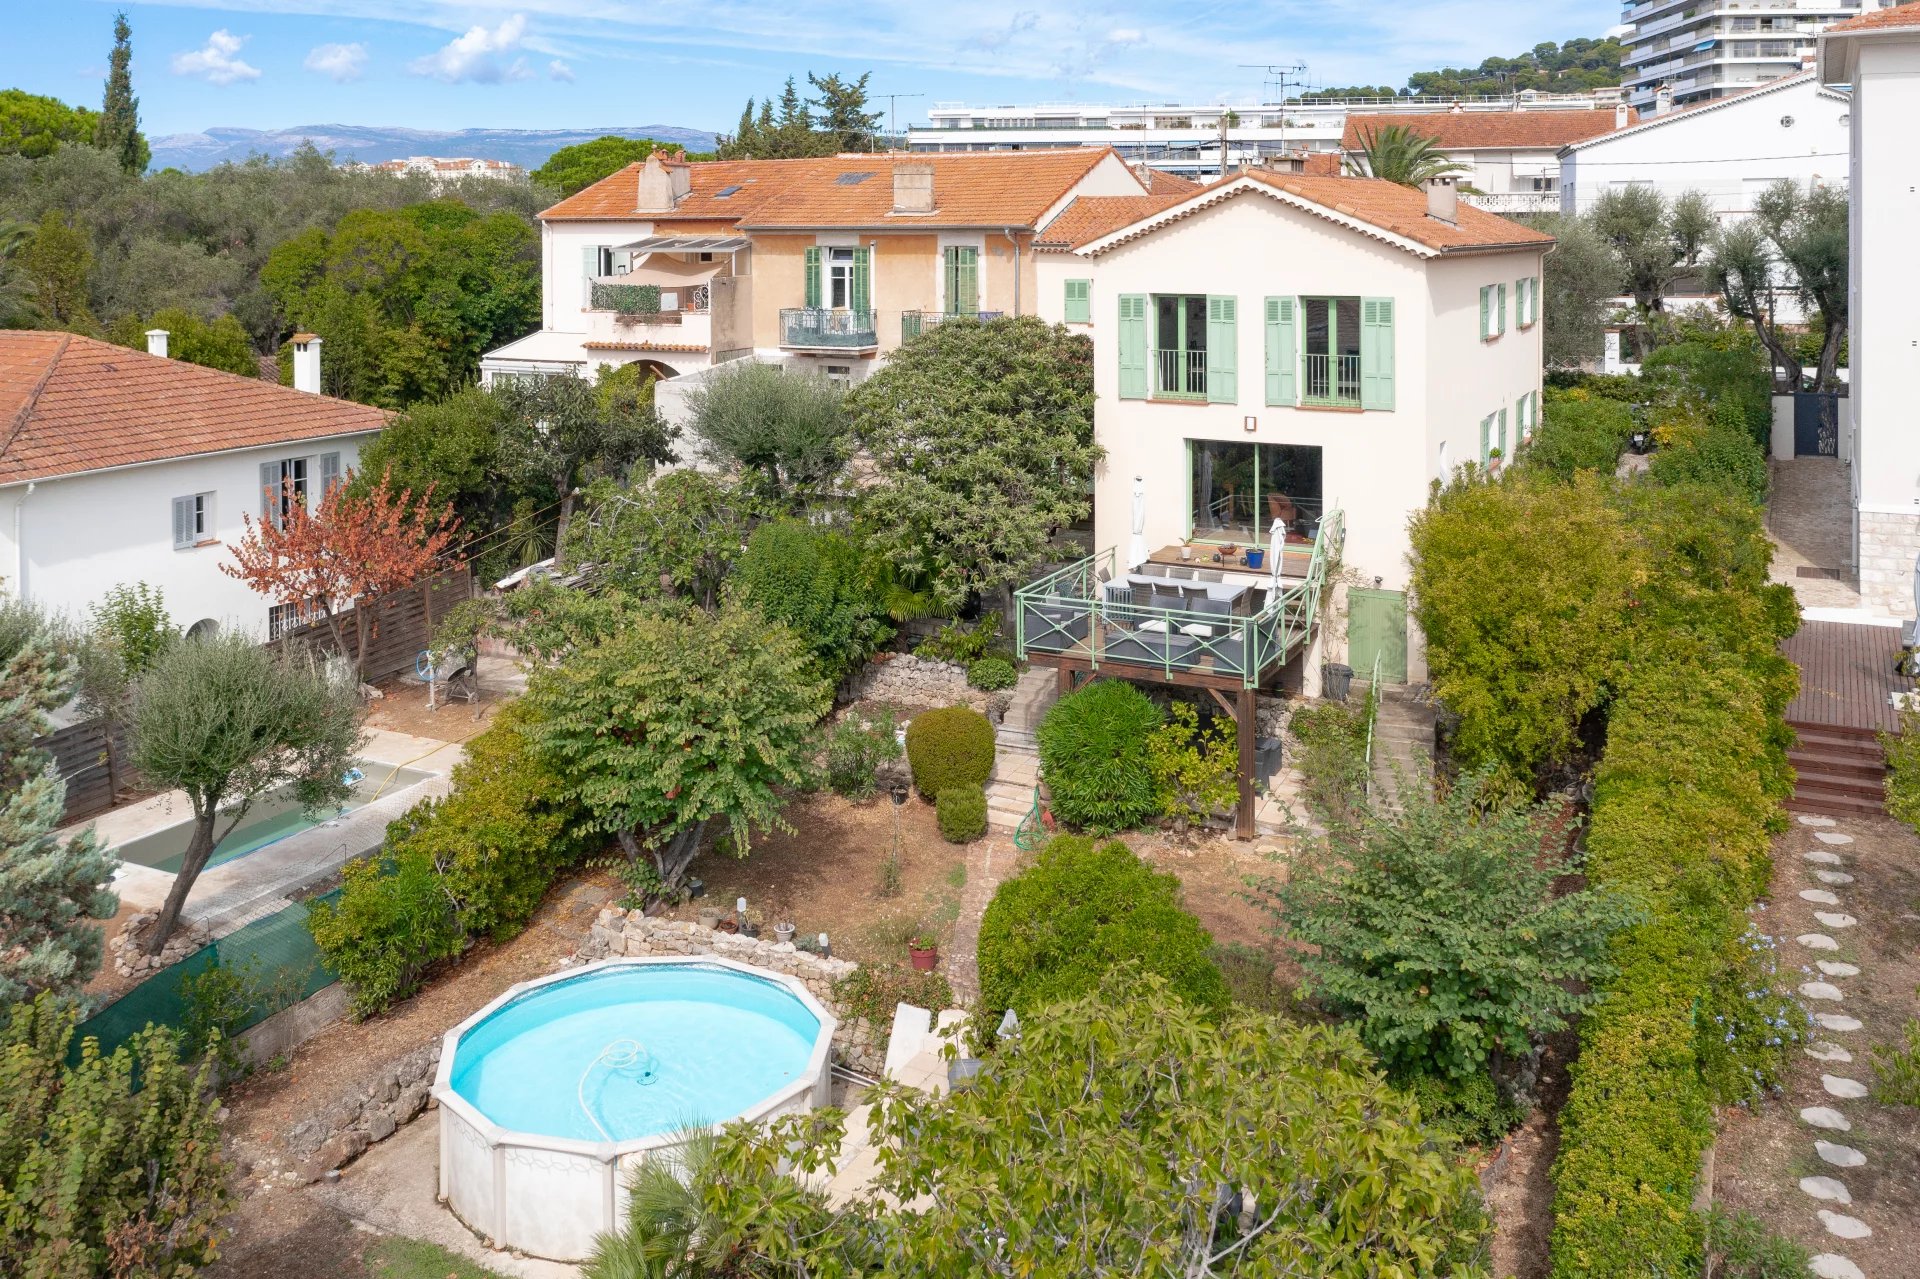 Cannes: Montfleury sector: Villa 213m2 location n°1, Quiet, garden, swimming pool, private parking!